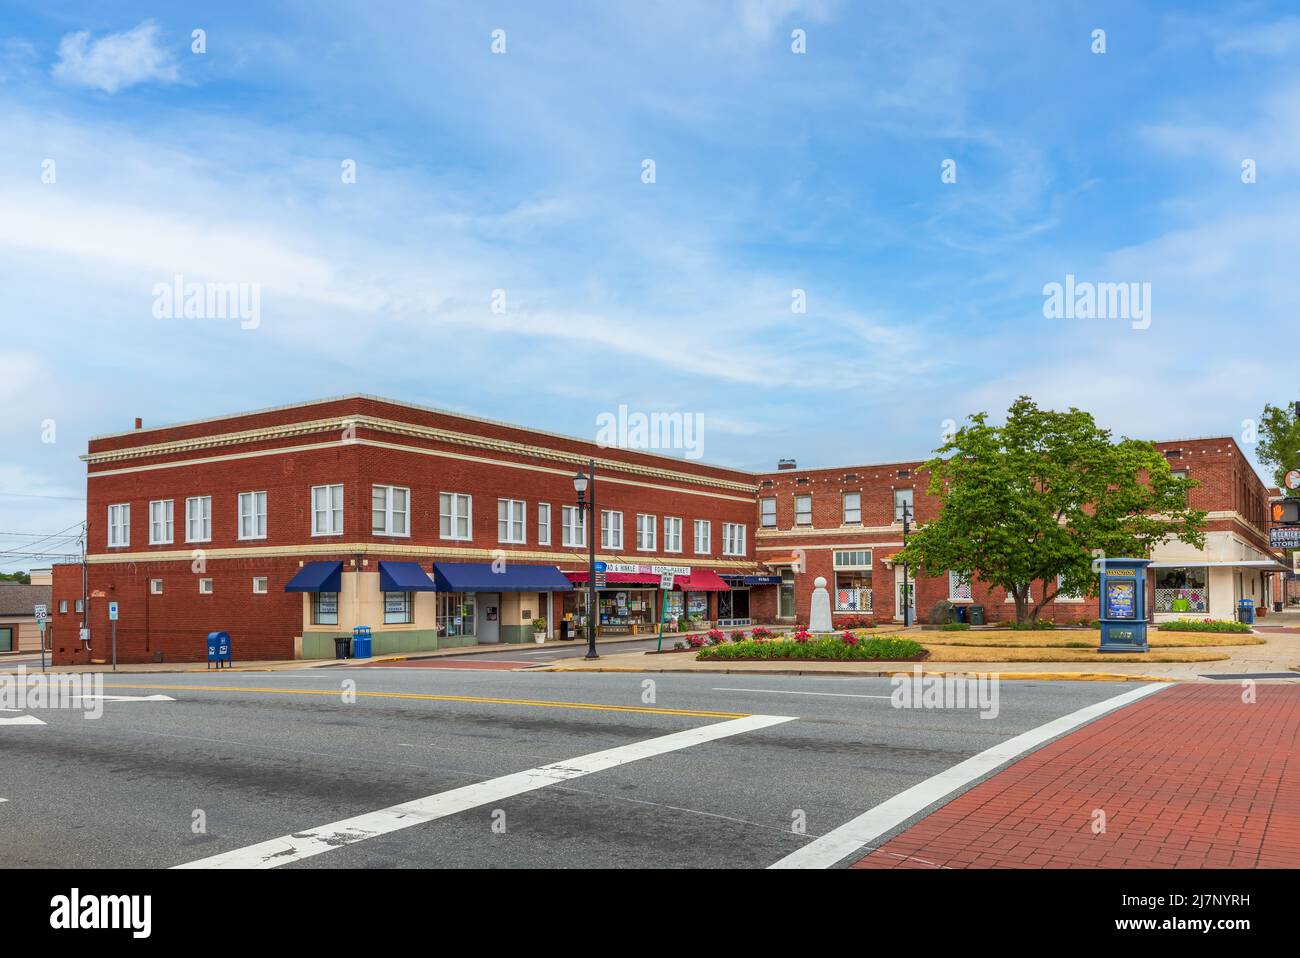 LEXINGTON, NC, USA-8 MAY 2022: Wide angle view of Main St. corner showing small commons area and vintage store buildings, information kiosk, food mark Stock Photo